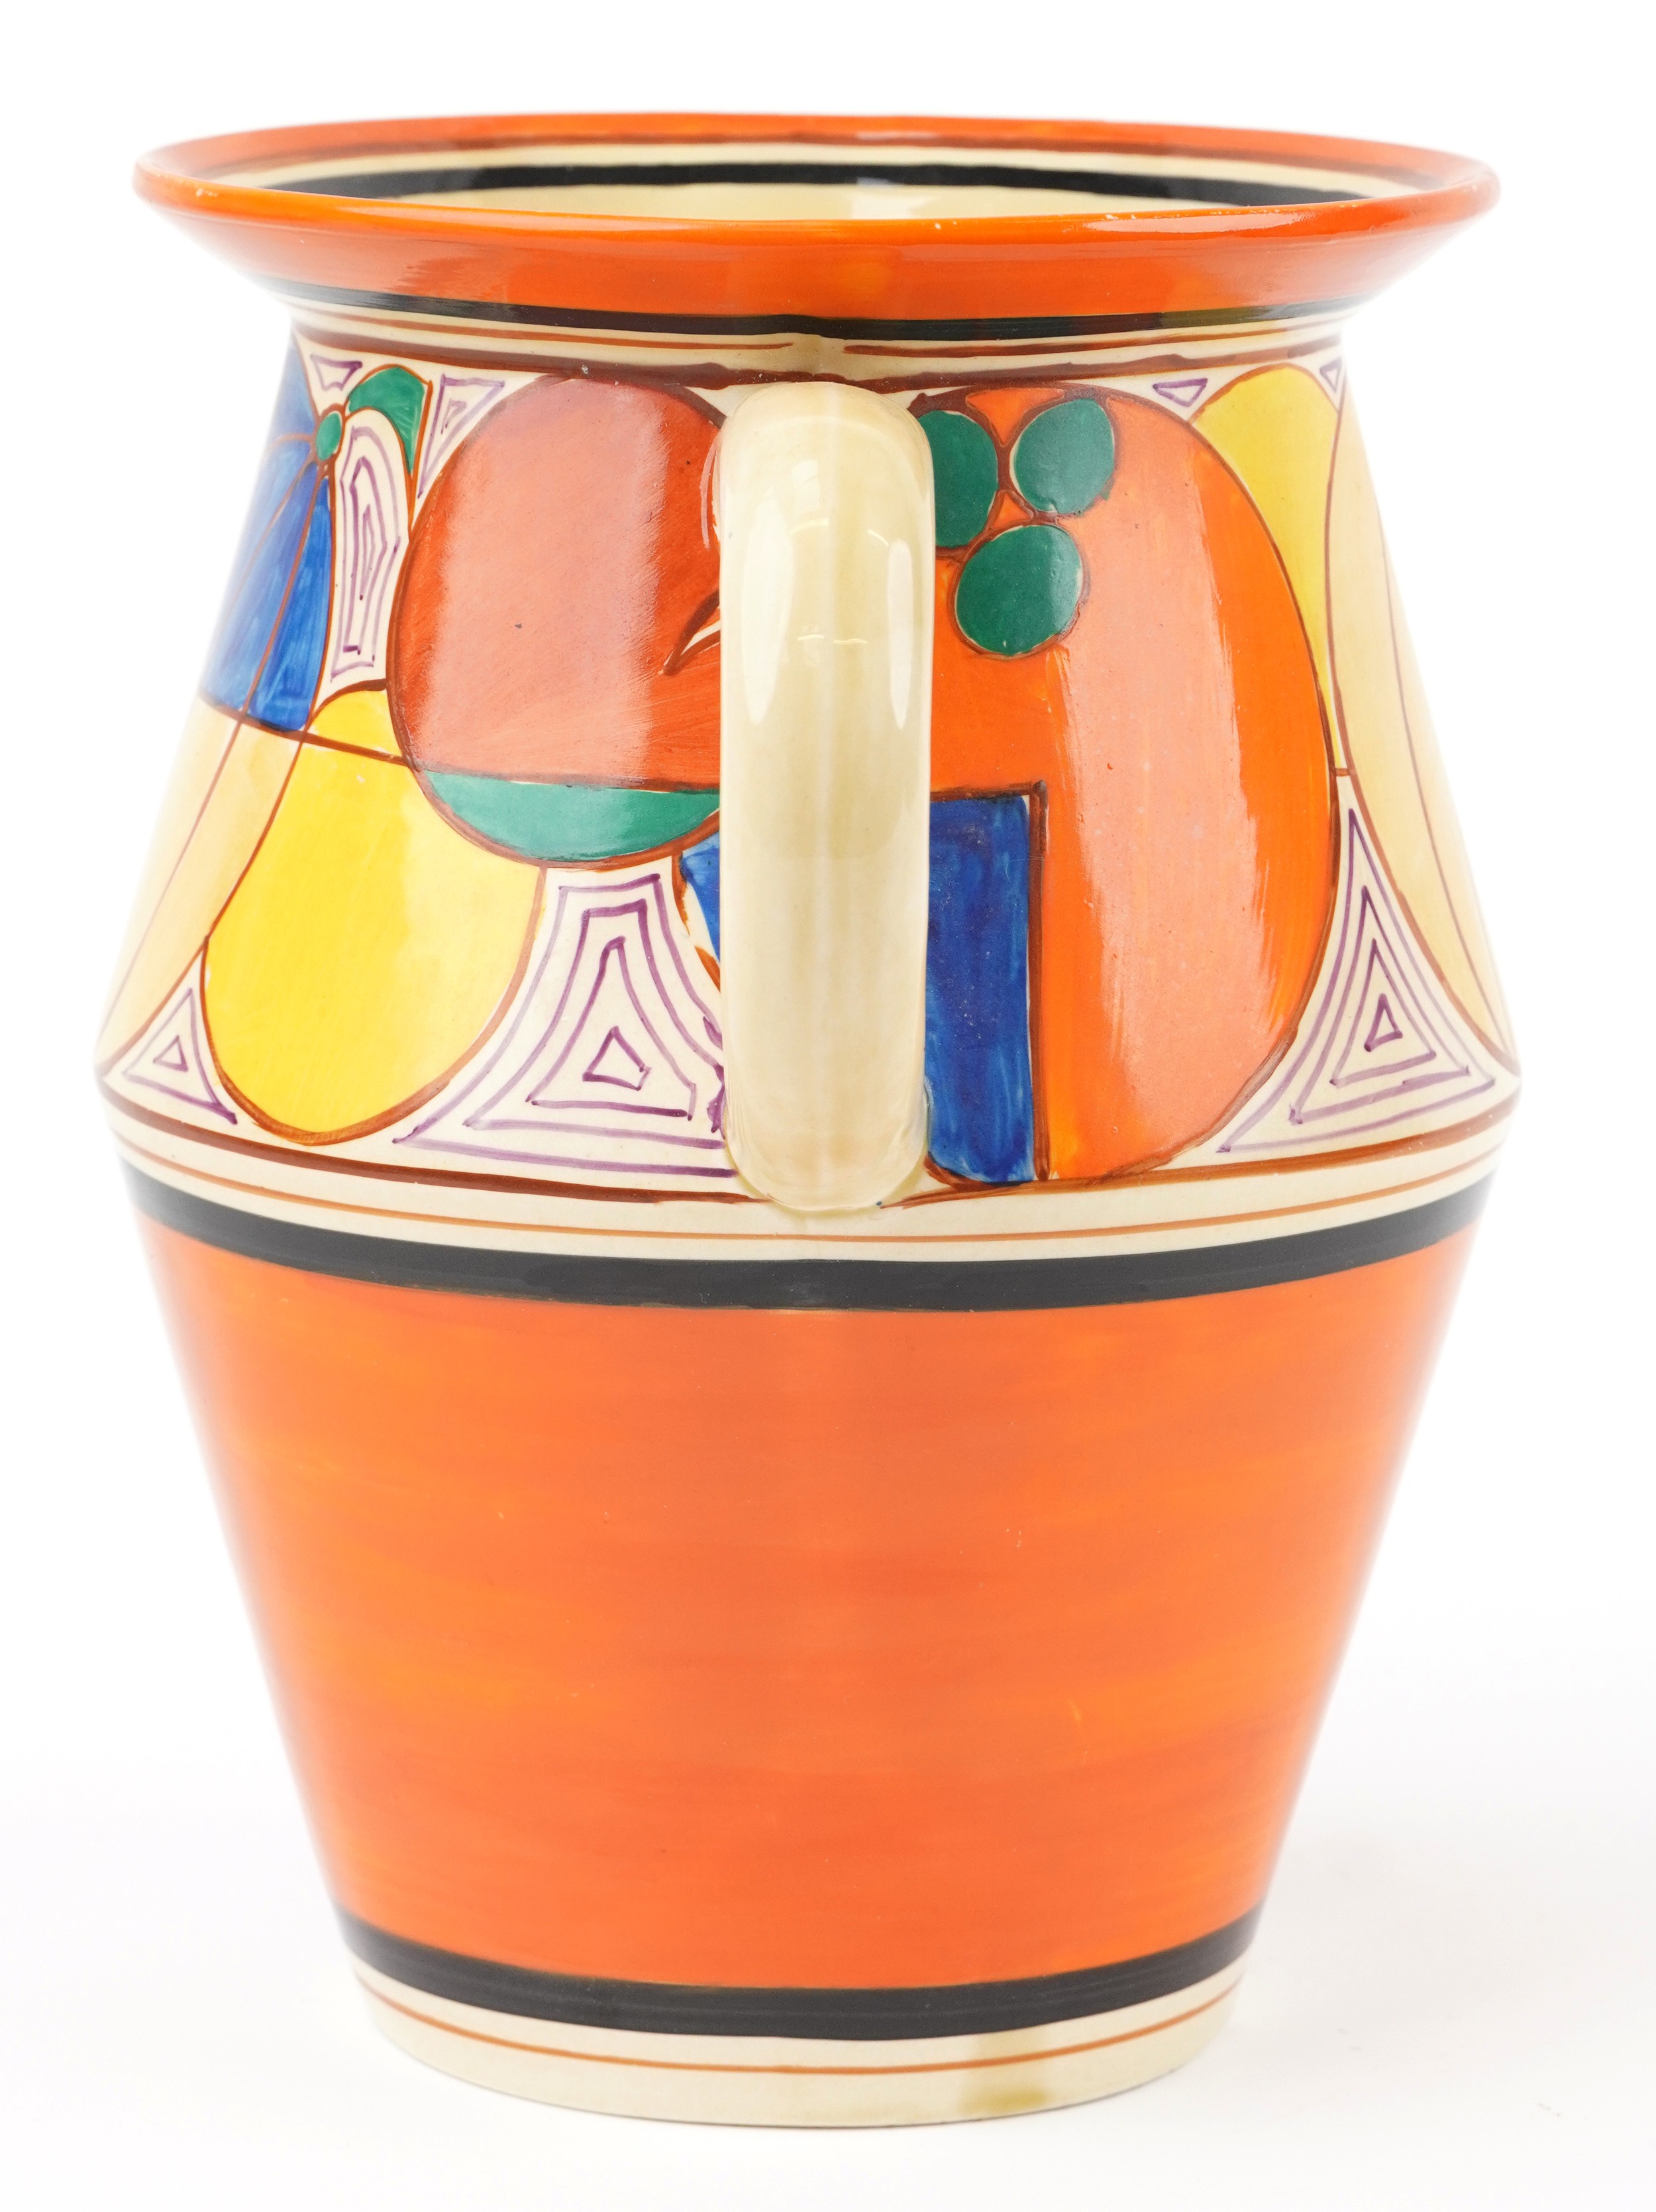 Clarice Cliff, large Art Deco Fantastique Bizarre Tolphin wash jug hand painted in the melon - Image 5 of 8